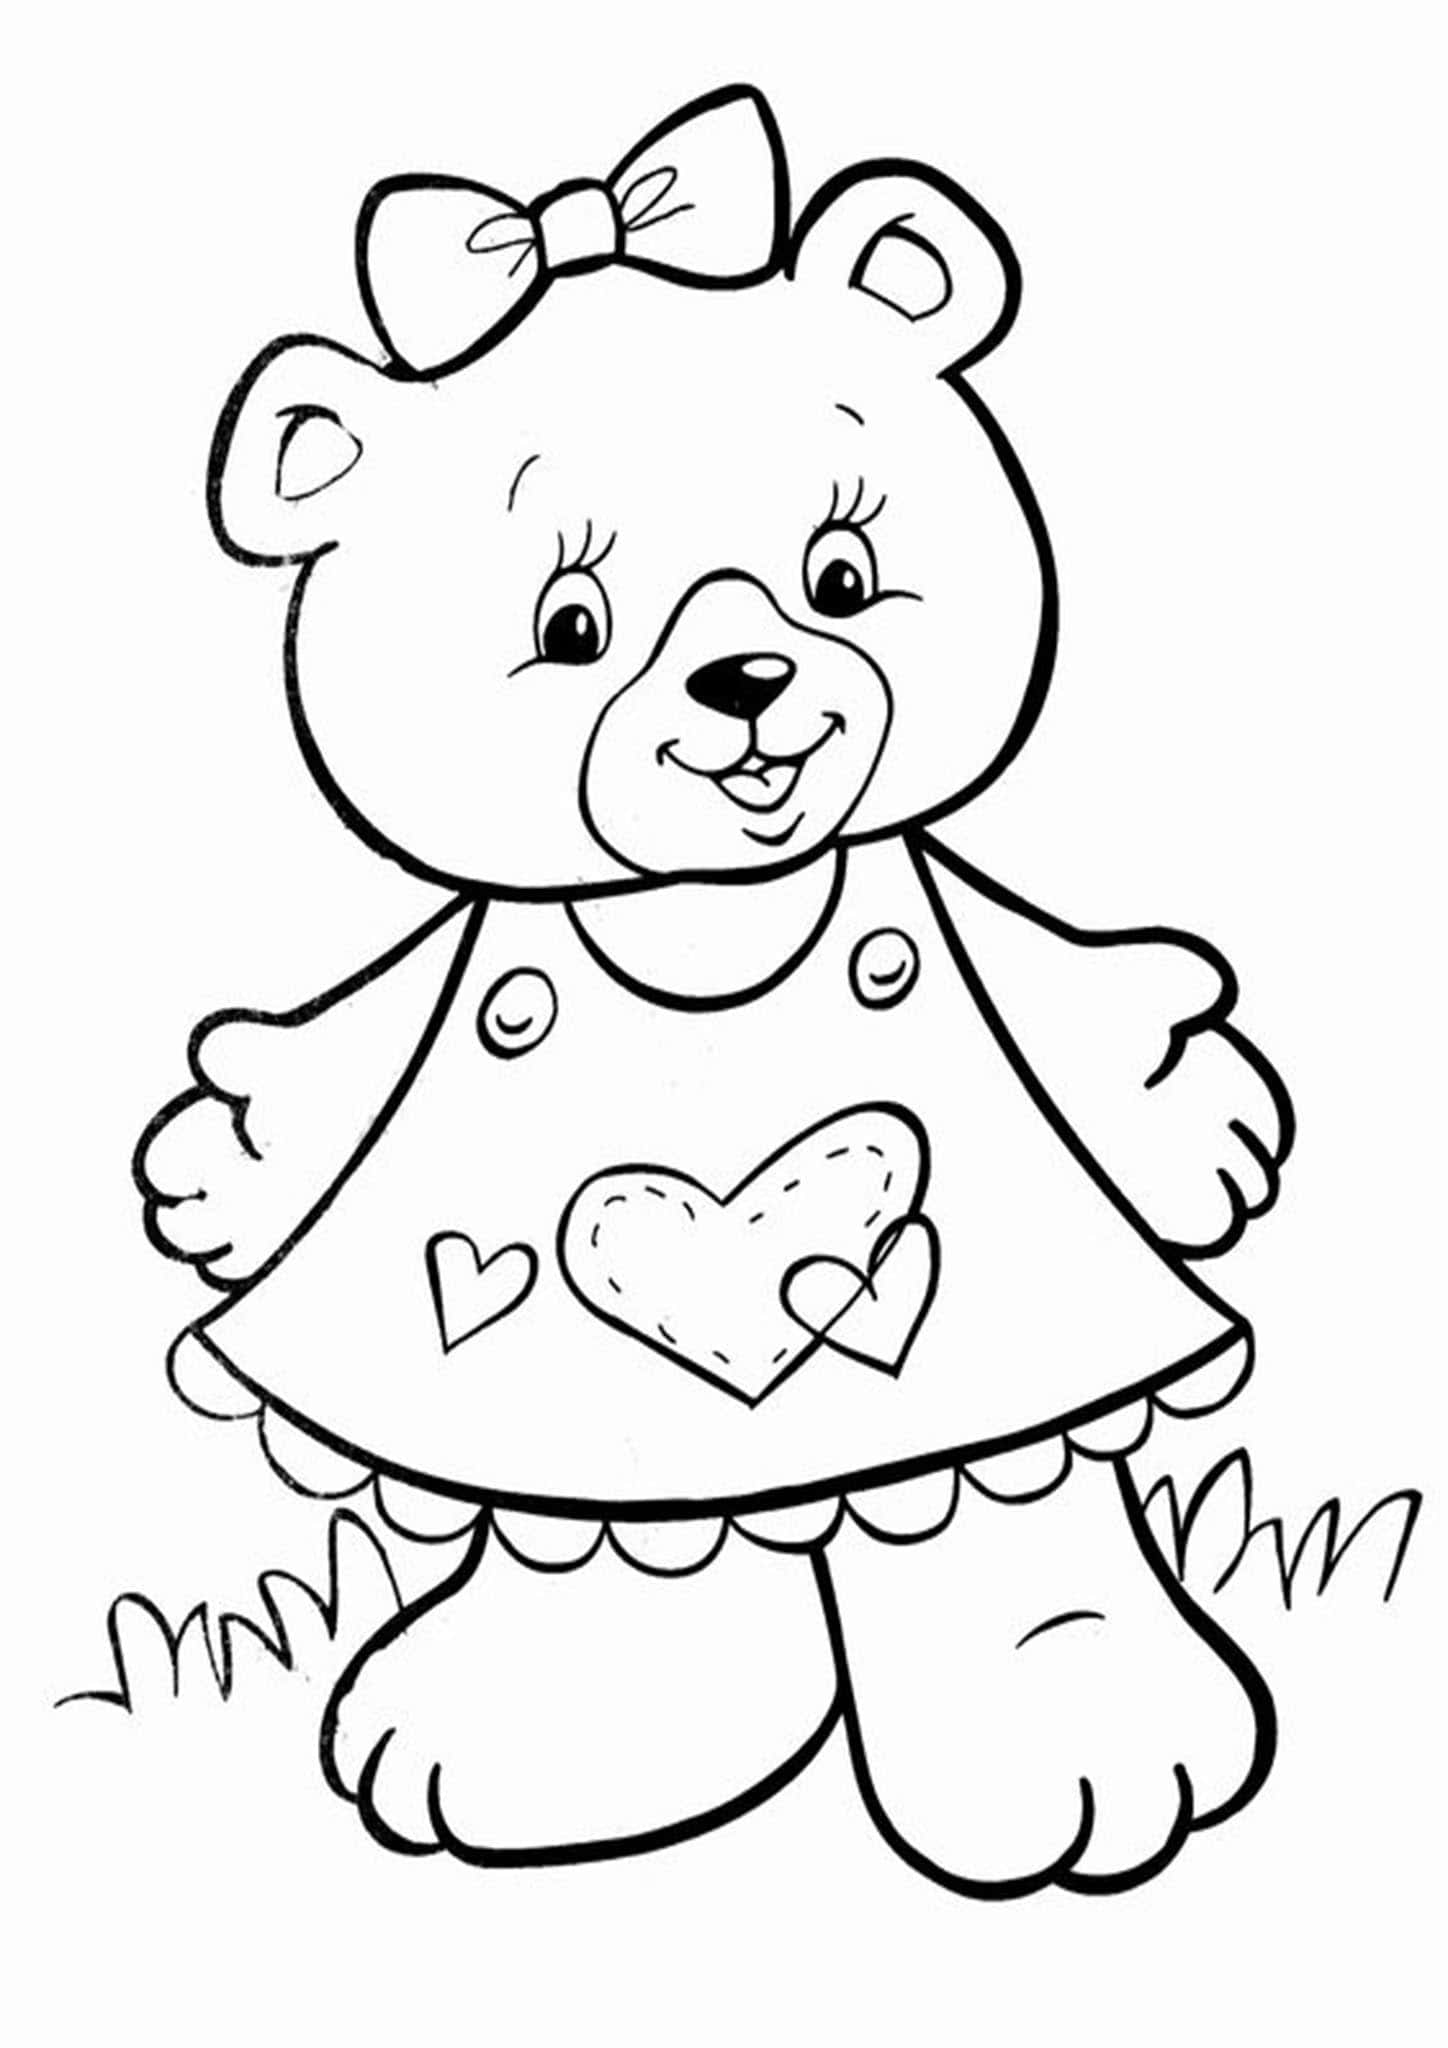 Free easy to print bear coloring pages